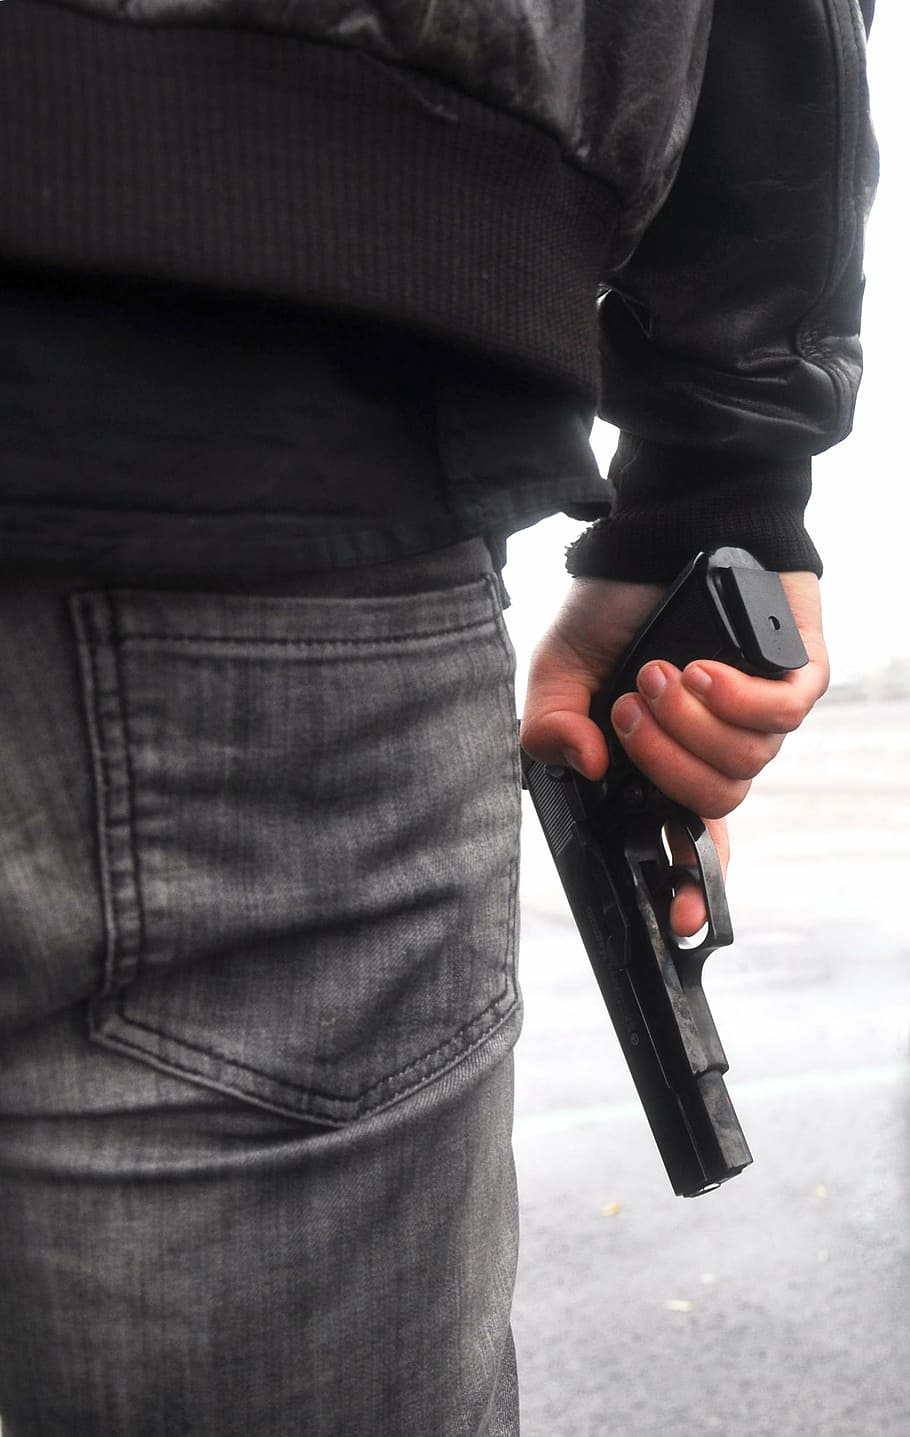 person, wearing, black, leather jacket, holding, semi-automatic, gun, gangster, leather, criminal